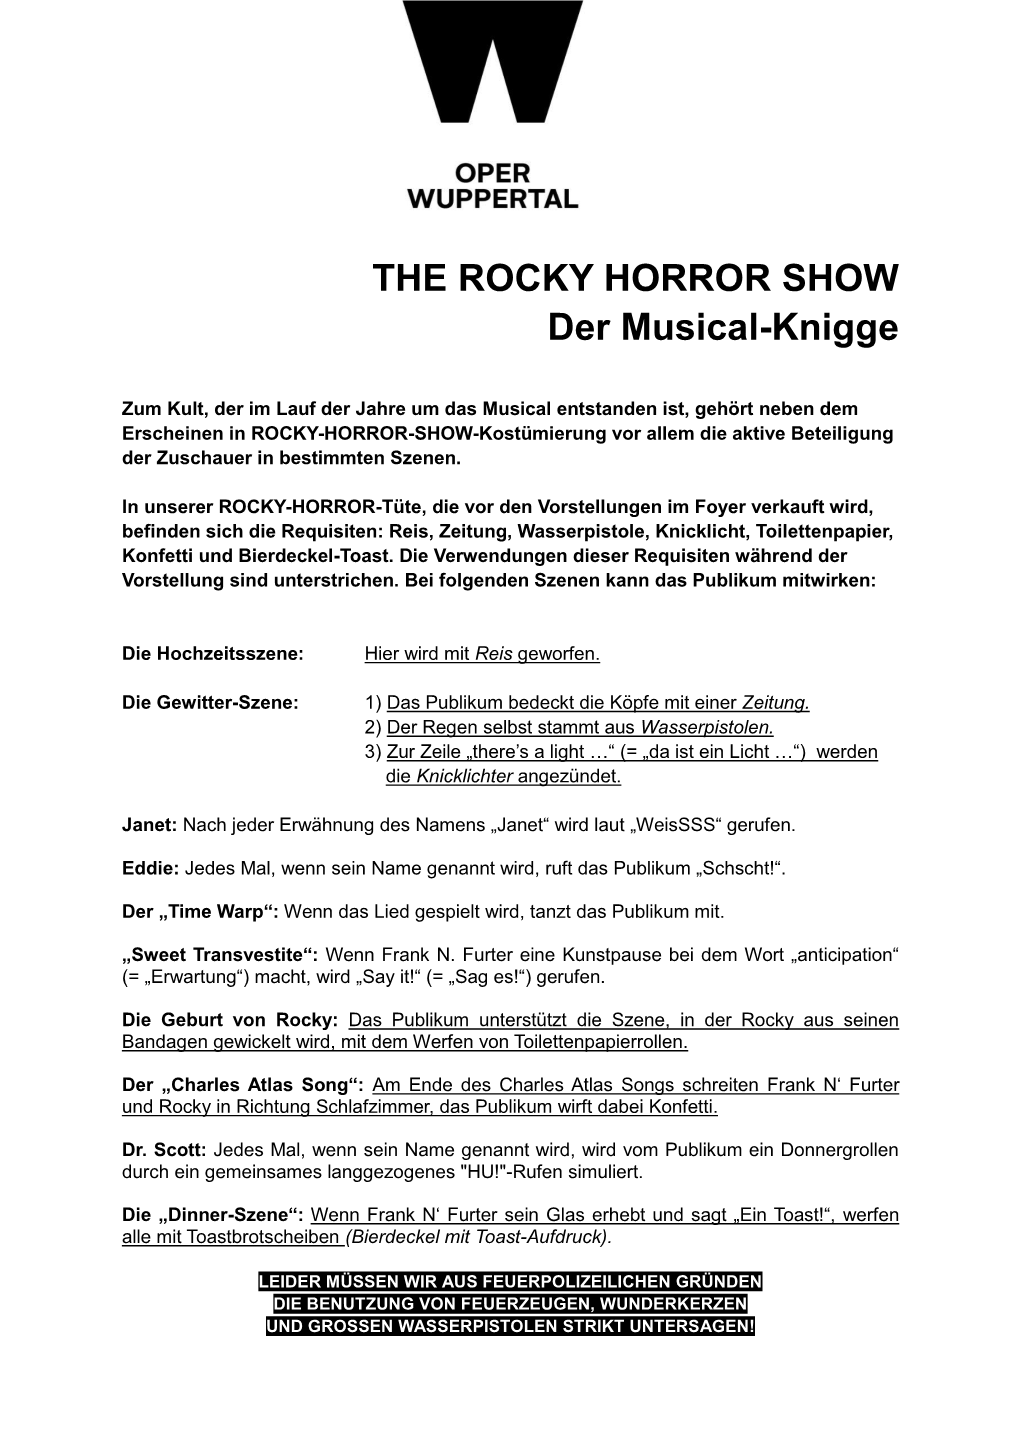 THE ROCKY HORROR SHOW Der Musical-Knigge